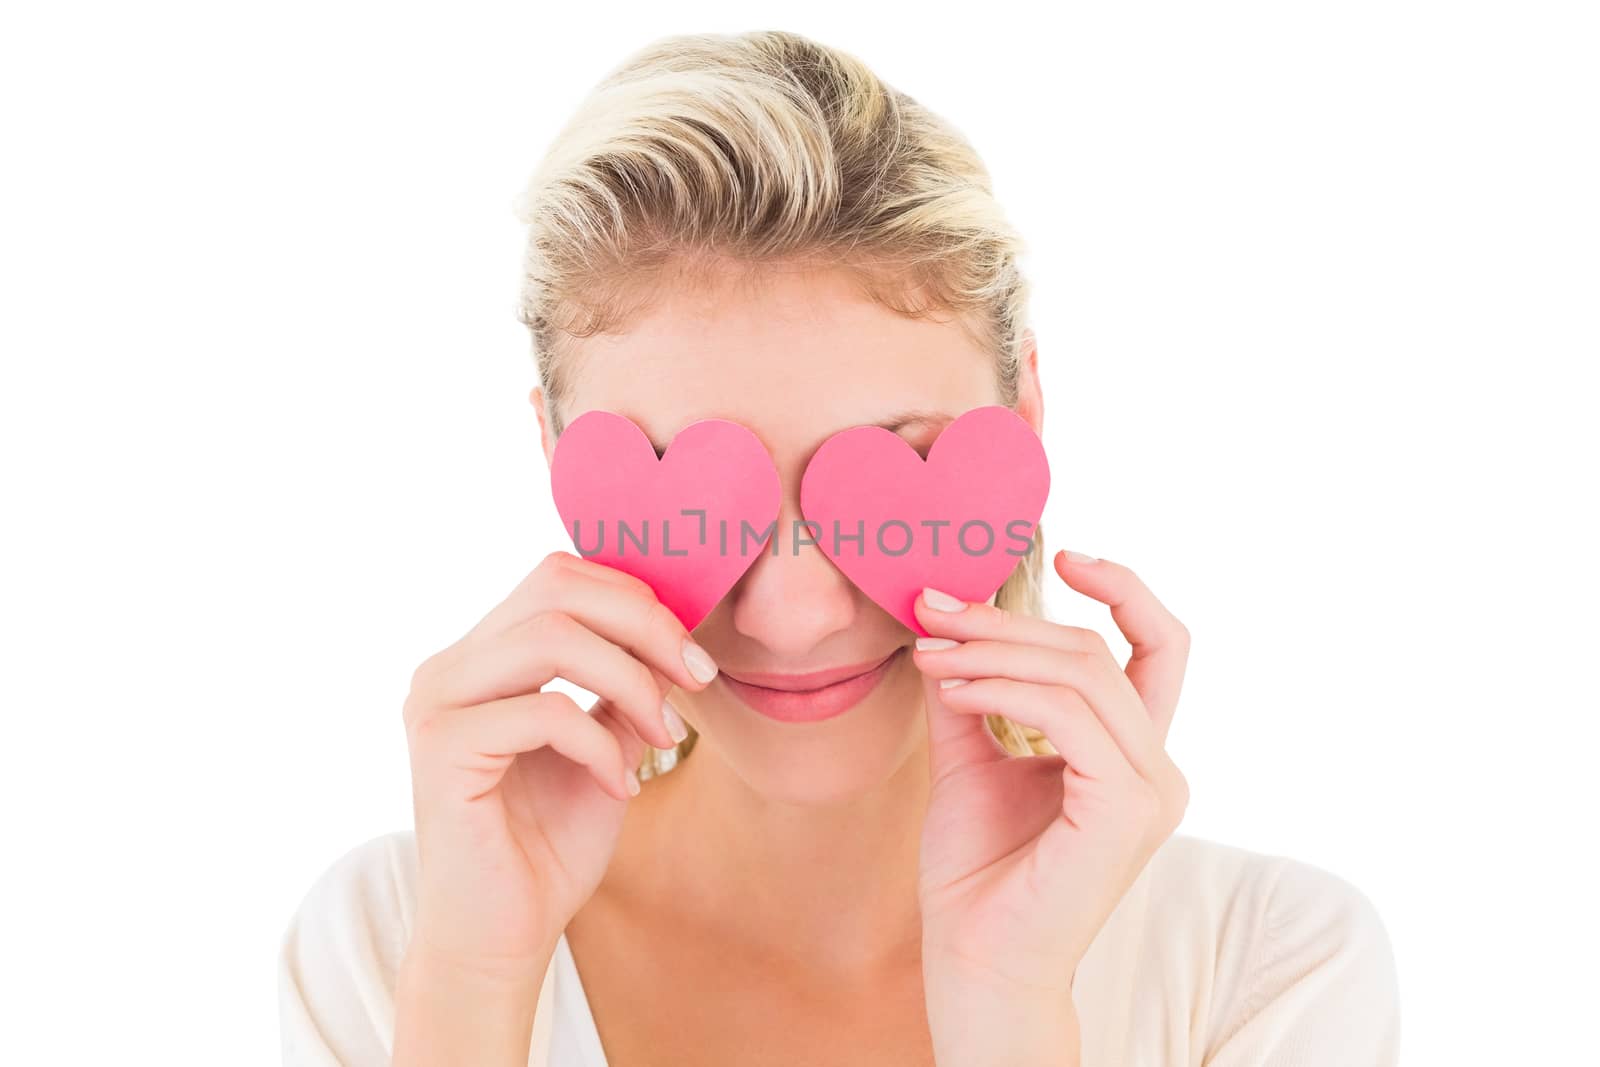 Attractive young blonde holding hearts over eyes on white background